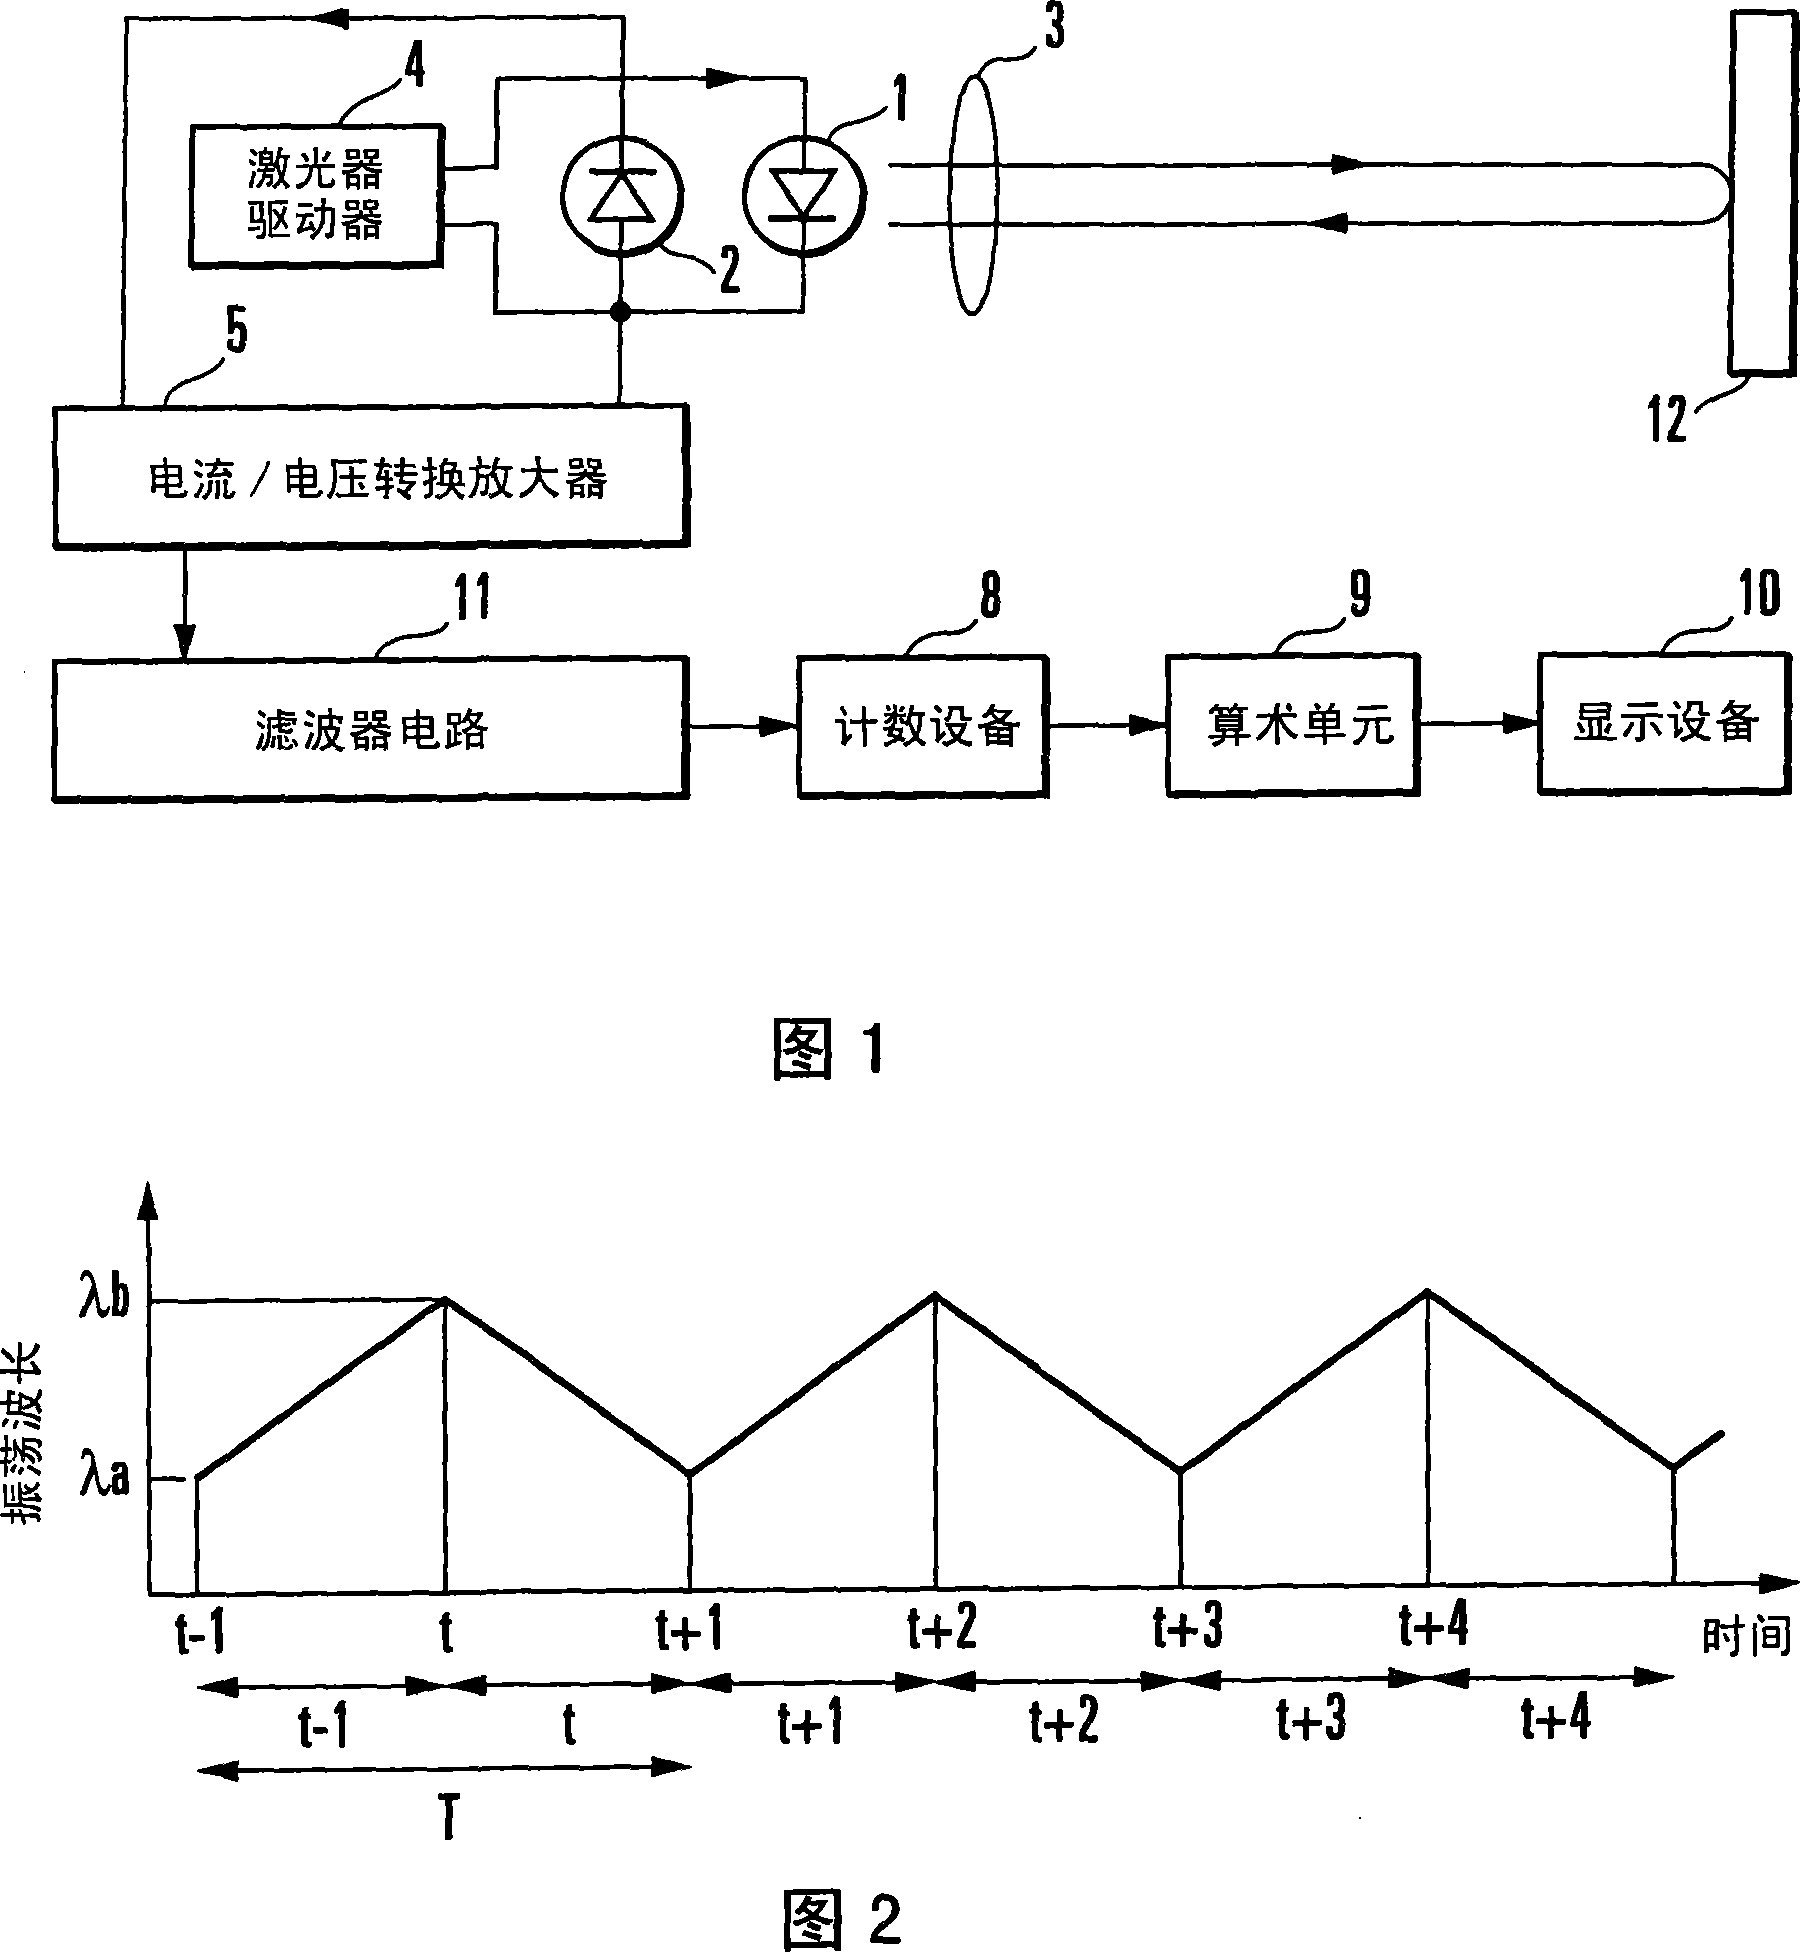 Counting device, distance meter, counting method, and distance measuring method